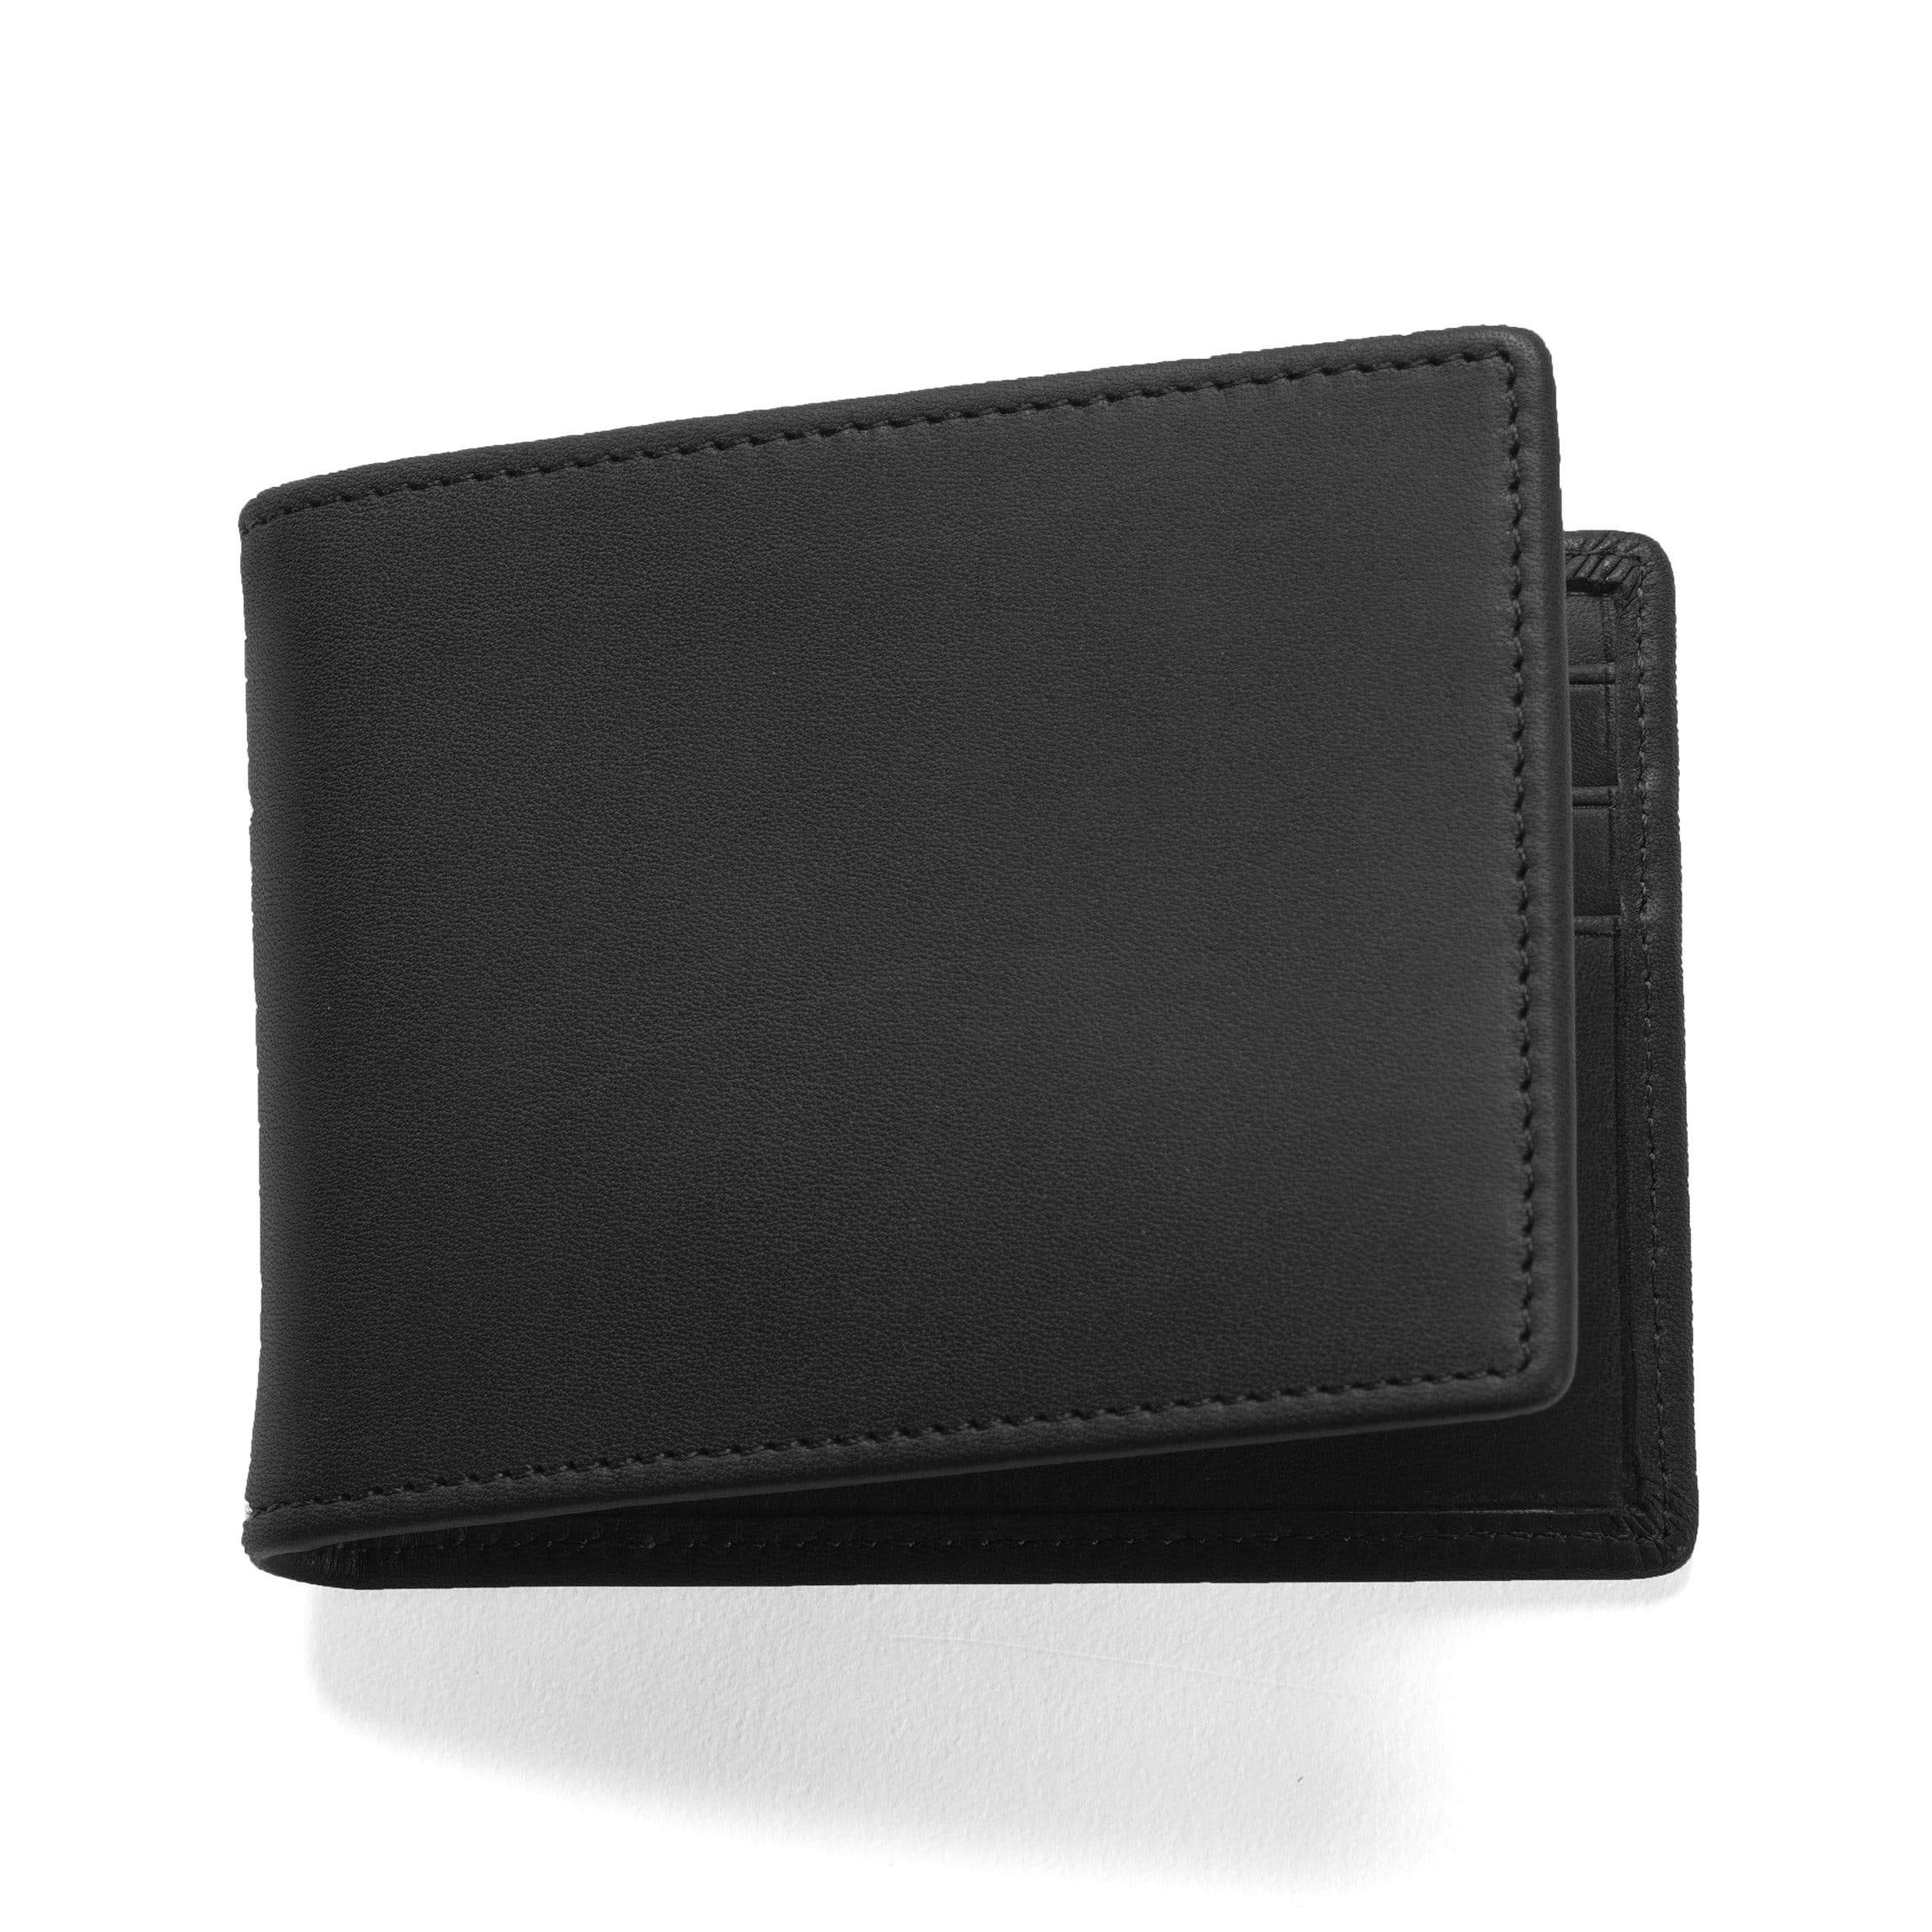 Leatherology Black Onyx Men's Thin Bifold Wallet - RFID Available